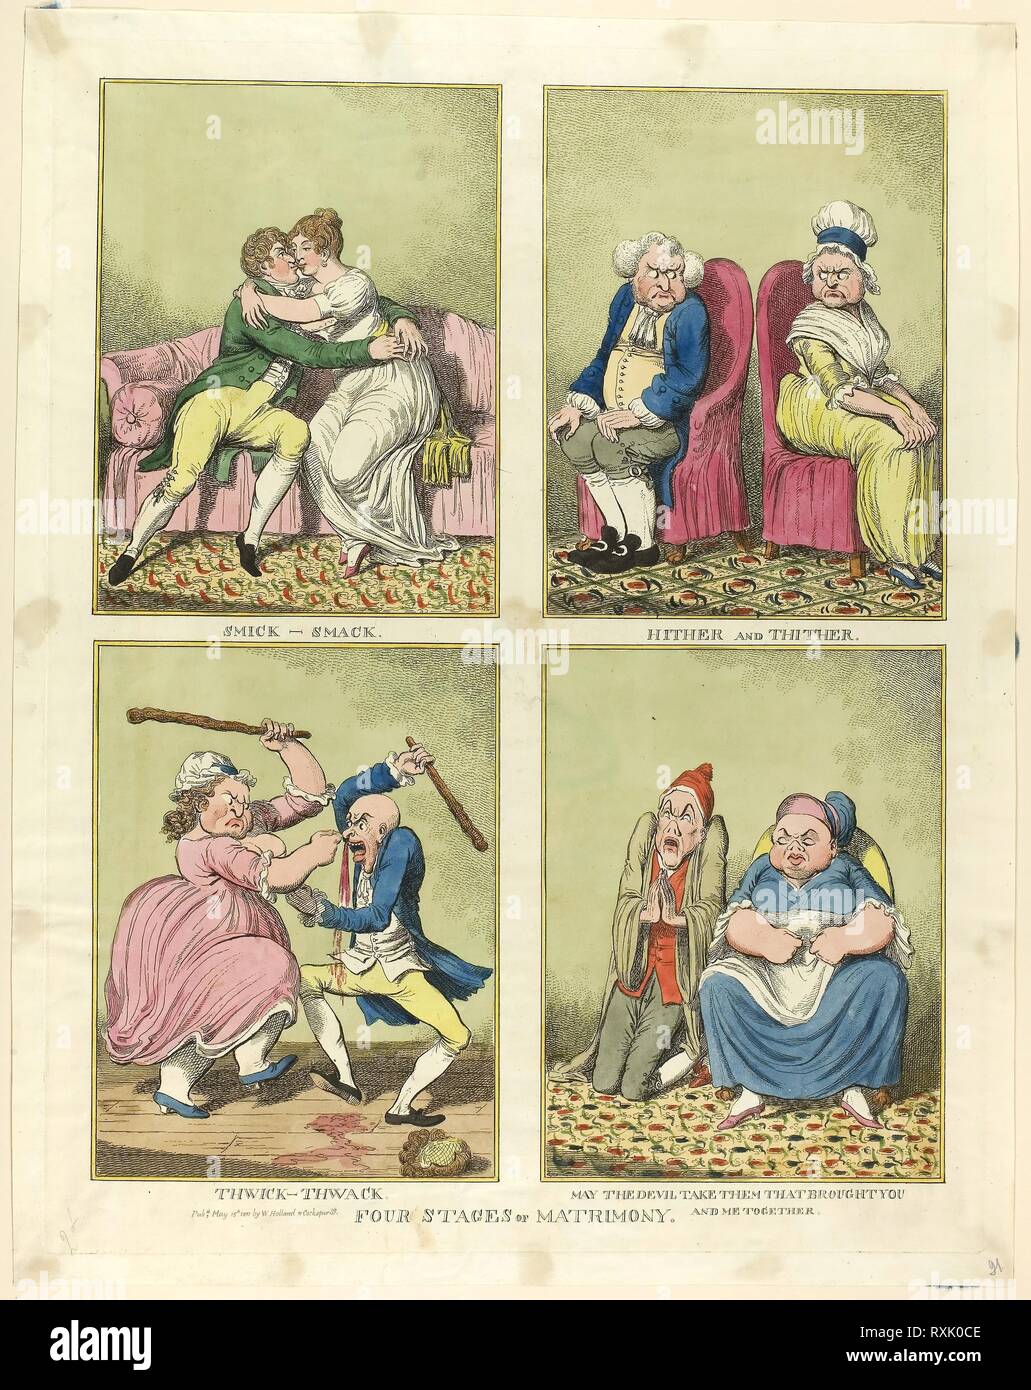 Four Stages of Matrimony. after Richard Newton (English, 1777-1798); published by William Holland (English, 1757-1815). Date: 1811. Dimensions: 200 × 150 mm (images); 450 × 350 mm (plate); 470 × 372 mm (sheet). Etching, with hand-coloring, on paper. Origin: England. Museum: The Chicago Art Institute. Stock Photo